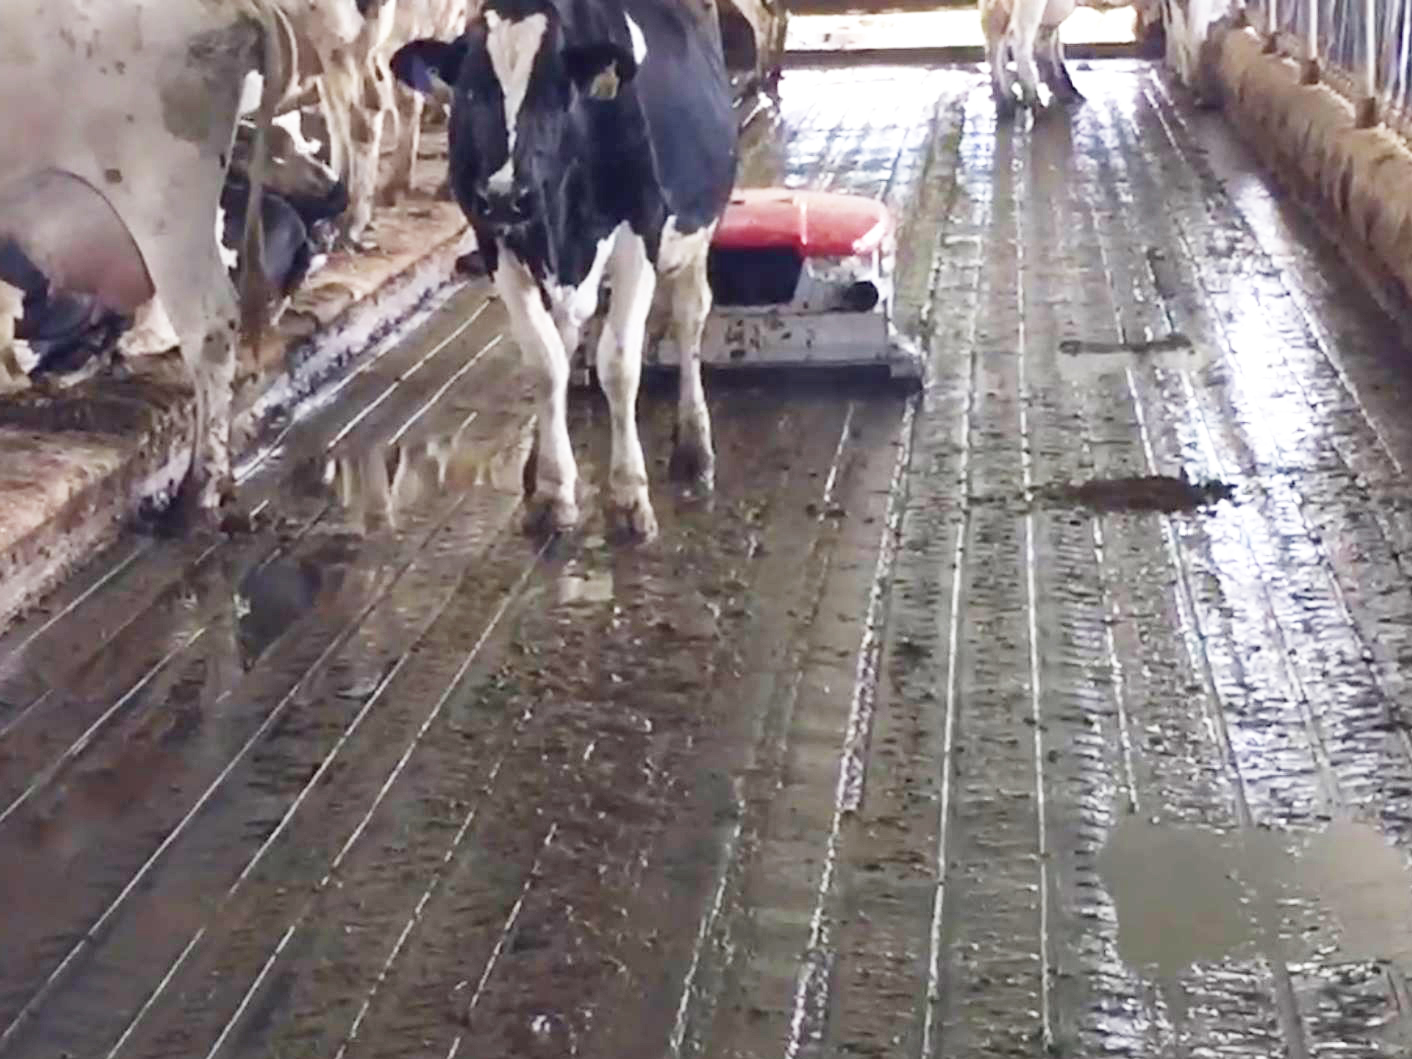 lely discovery at work with cow